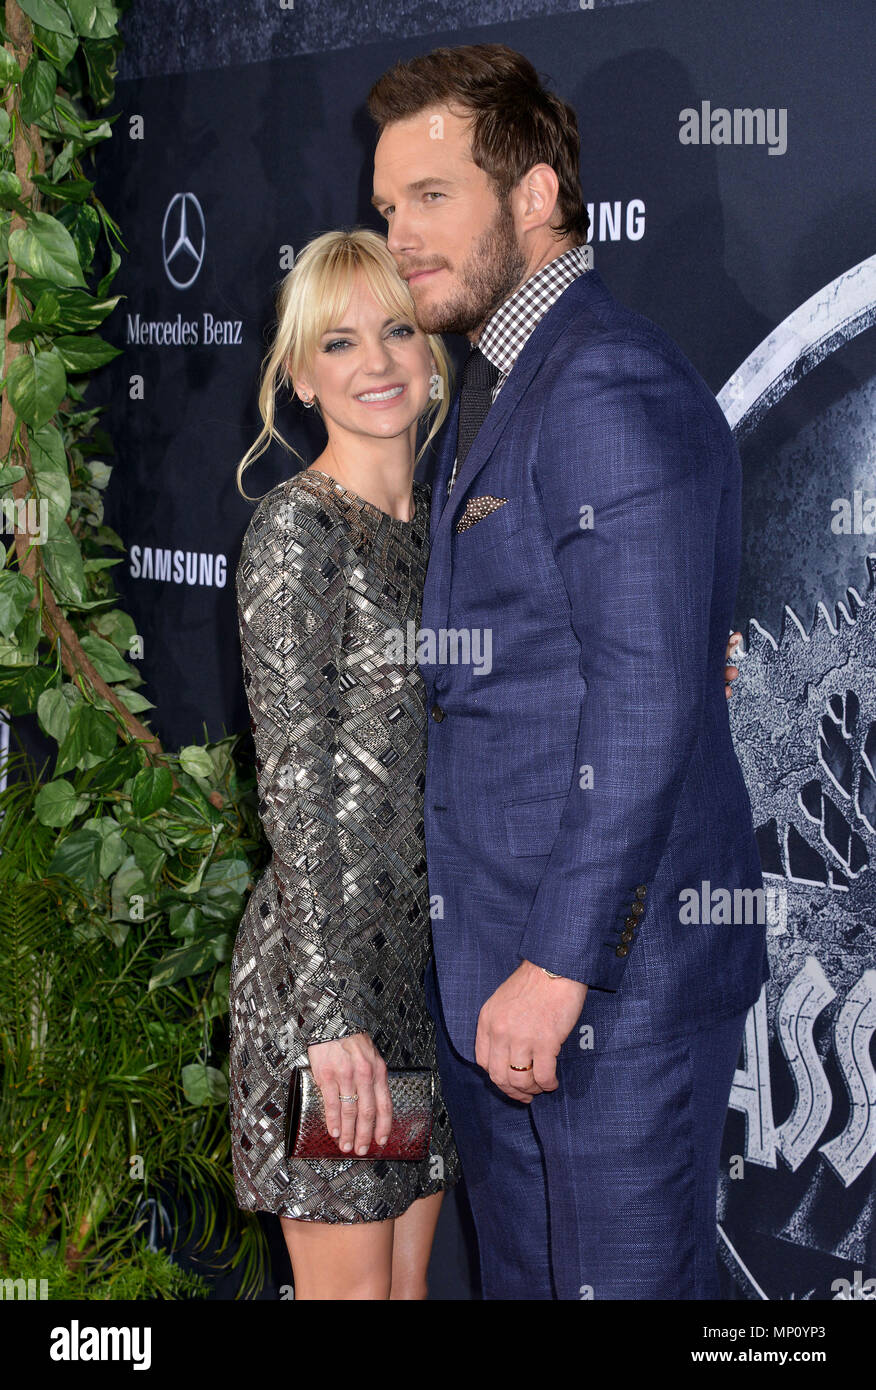 Anna Faris, Chris Pratt 055 at the Jurassic World Premiere at the Hollywood and Highland, Dolby Theatre in Los Angeles.. June, 9, 2015.Anna Faris, Chris Pratt 055 ------------- Red Carpet Event, Vertical, USA, Film Industry, Celebrities,  Photography, Bestof, Arts Culture and Entertainment, Topix Celebrities fashion /  Vertical, Best of, Event in Hollywood Life - California,  Red Carpet and backstage, USA, Film Industry, Celebrities,  movie celebrities, TV celebrities, Music celebrities, Photography, Bestof, Arts Culture and Entertainment,  Topix, vertical,  family from from the year , 2015, i Stock Photo